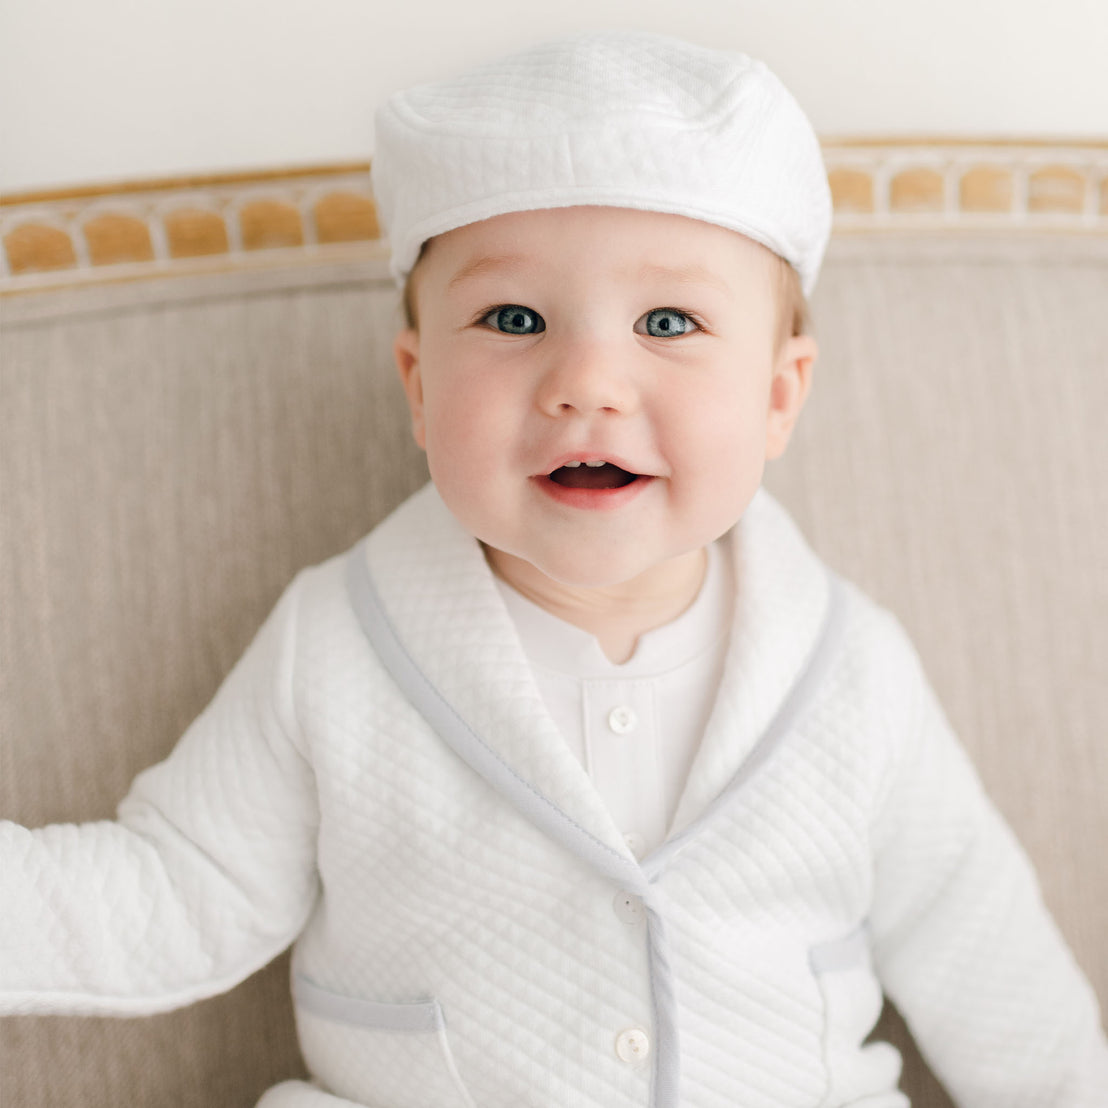 Close up picture of a baby smiling and wearing a Harrison 3-Piece Pants Suit, as well as the Harrison Quilted Newsboy Cap